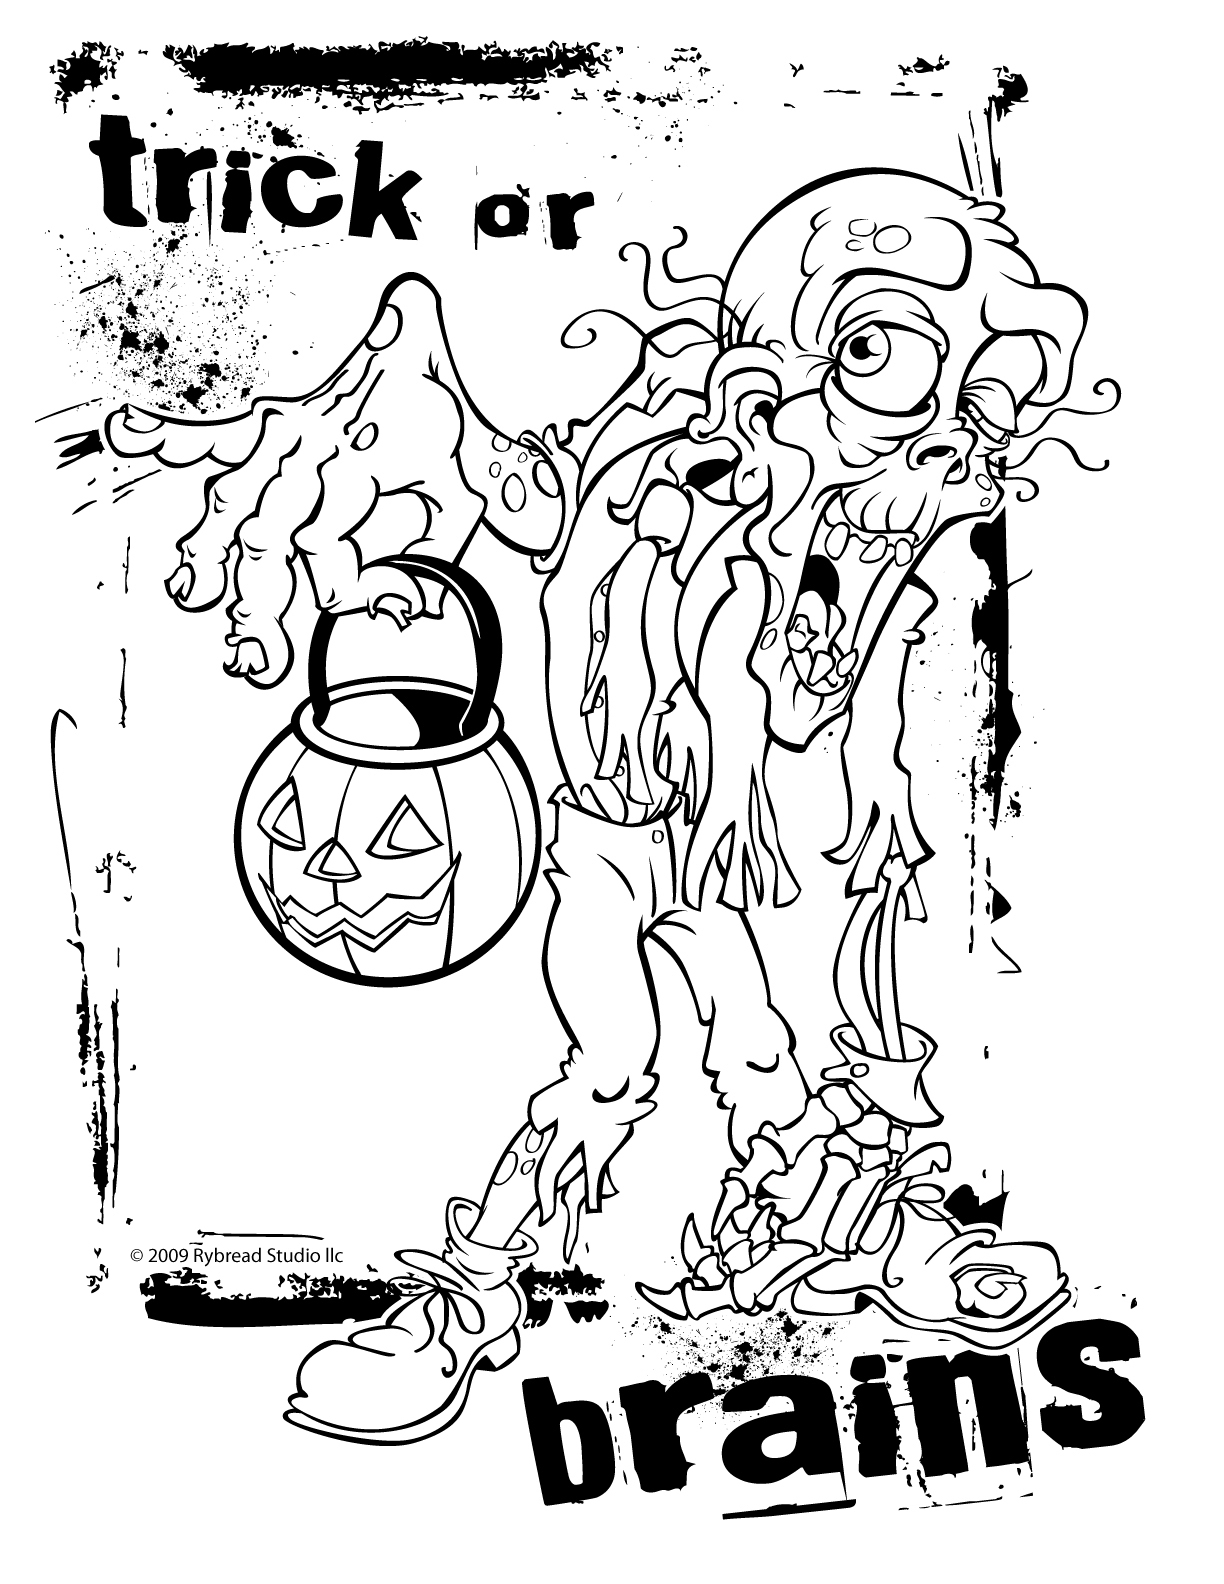 Call Of Duty Coloring Pages At Getcolorings | Free Printable à Coloriage Call Of Duty